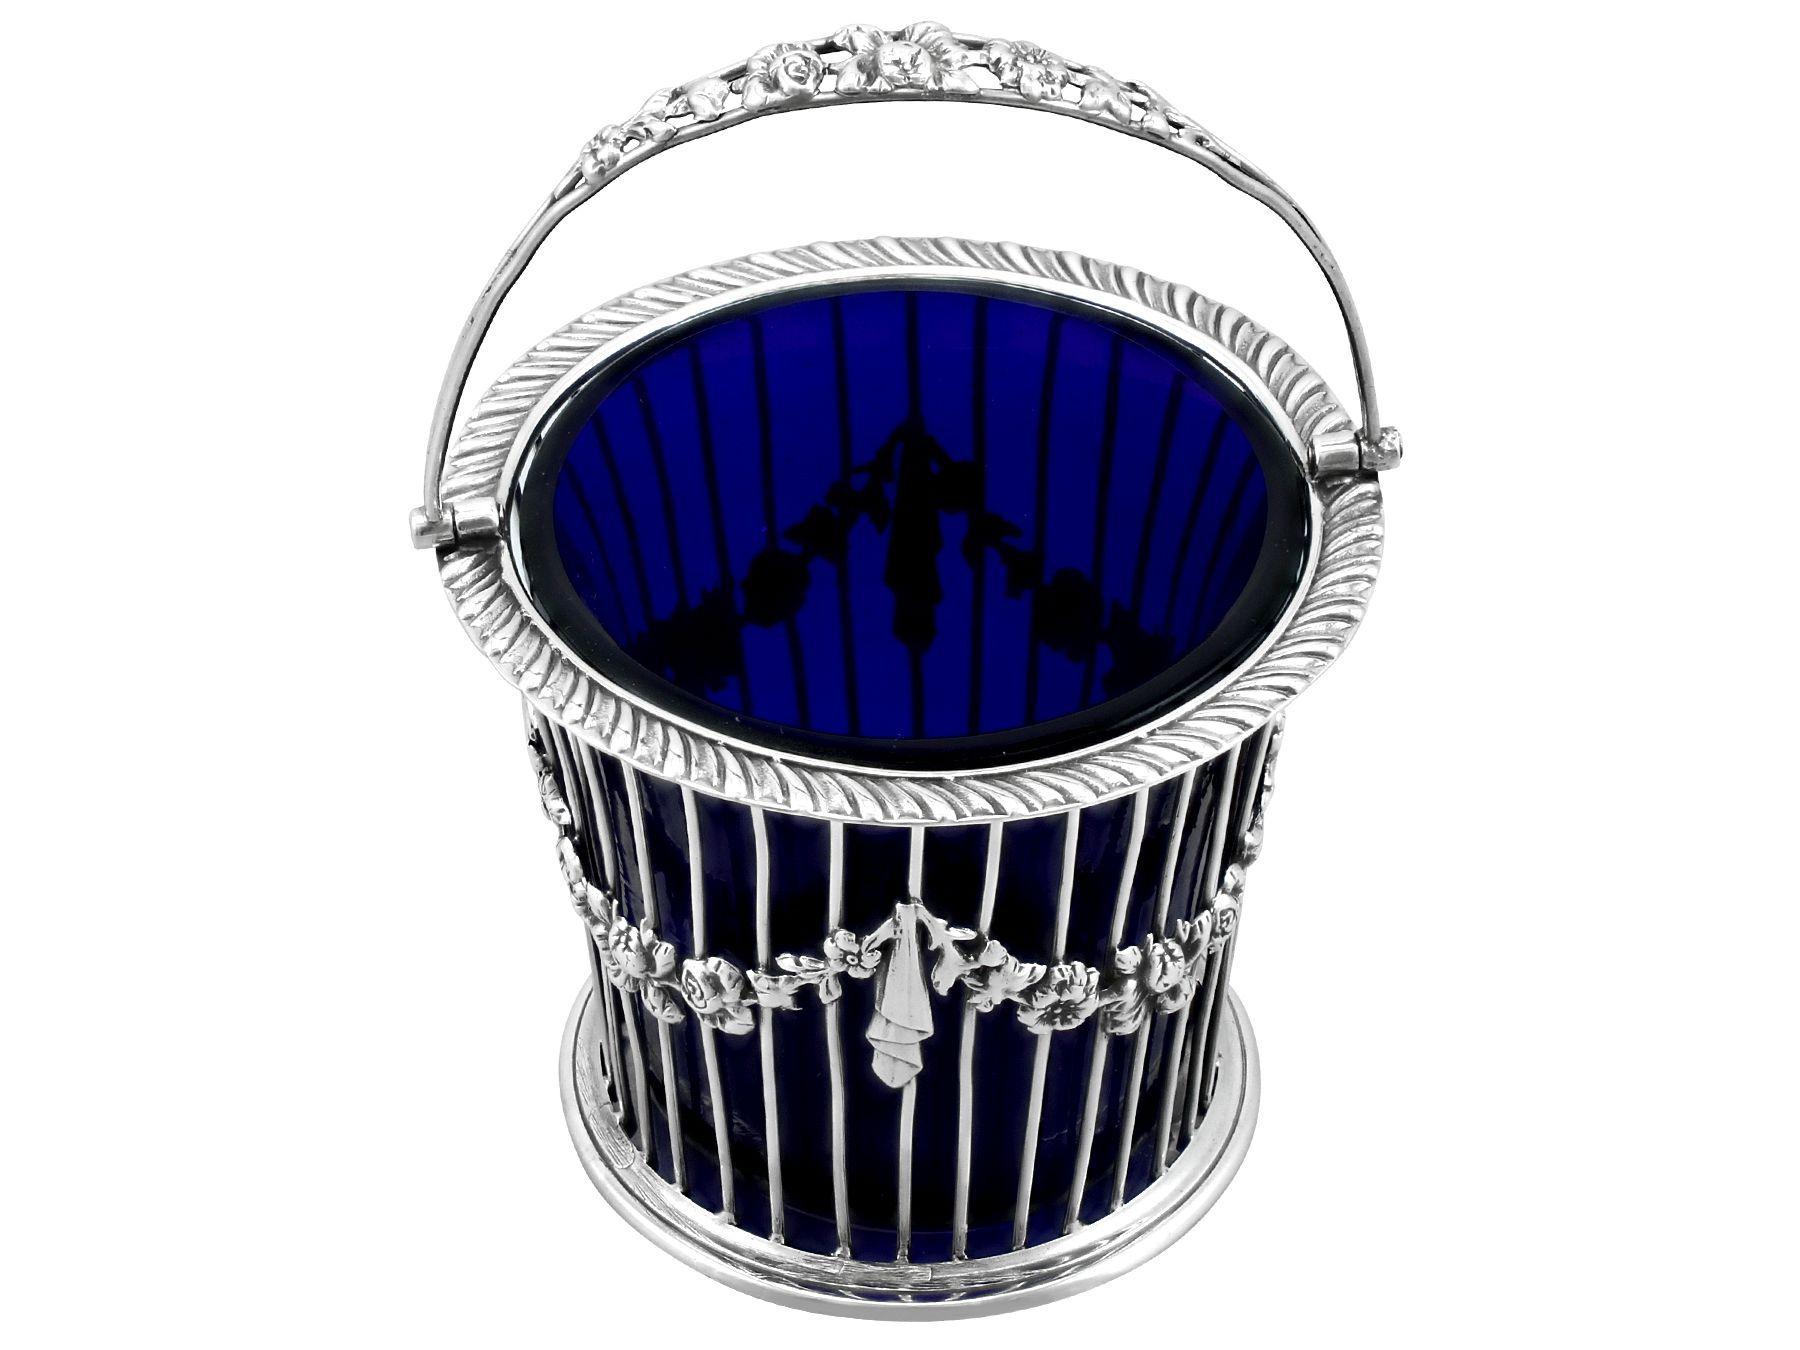 An exceptional, fine and impressive antique George V English sterling silver and blue glass sugar basket; an addition to our silver teaware collection

This exceptional antique George V sterling silver sugar basket has a tapering cylindrical form